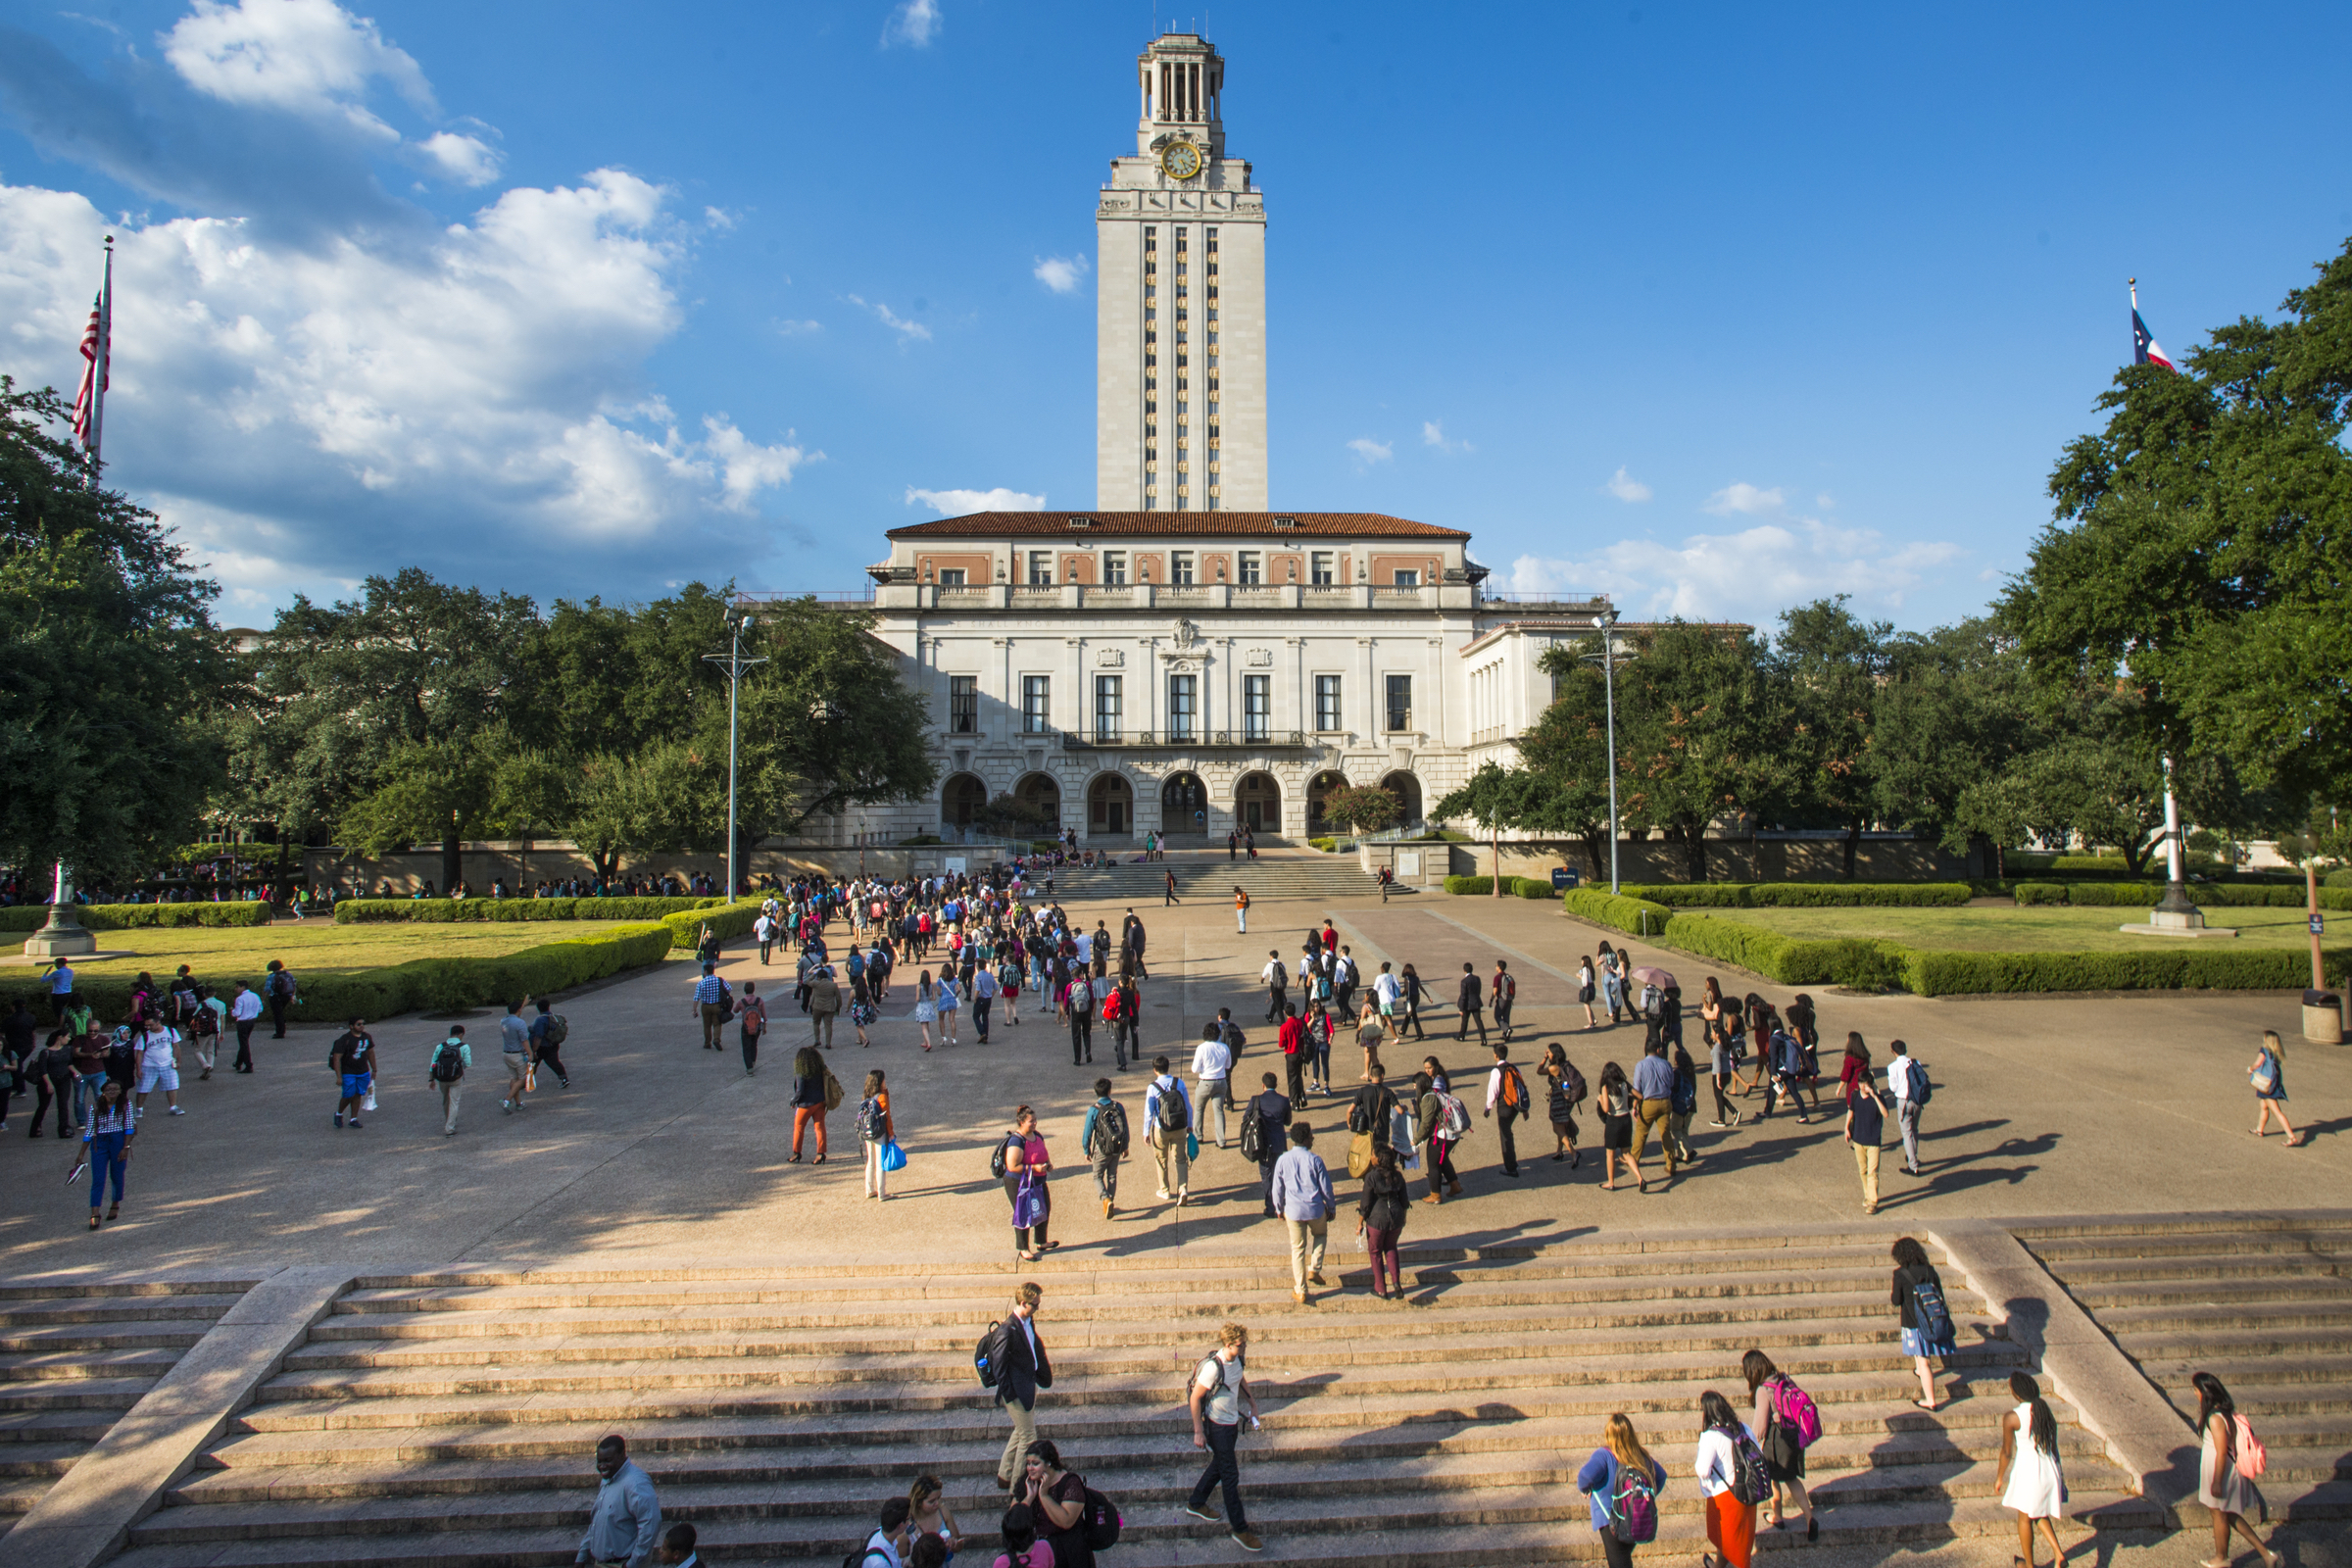 The UT Tower and Main Mall with its stairs are shown as students mill about on the University of Texas at Austin campus